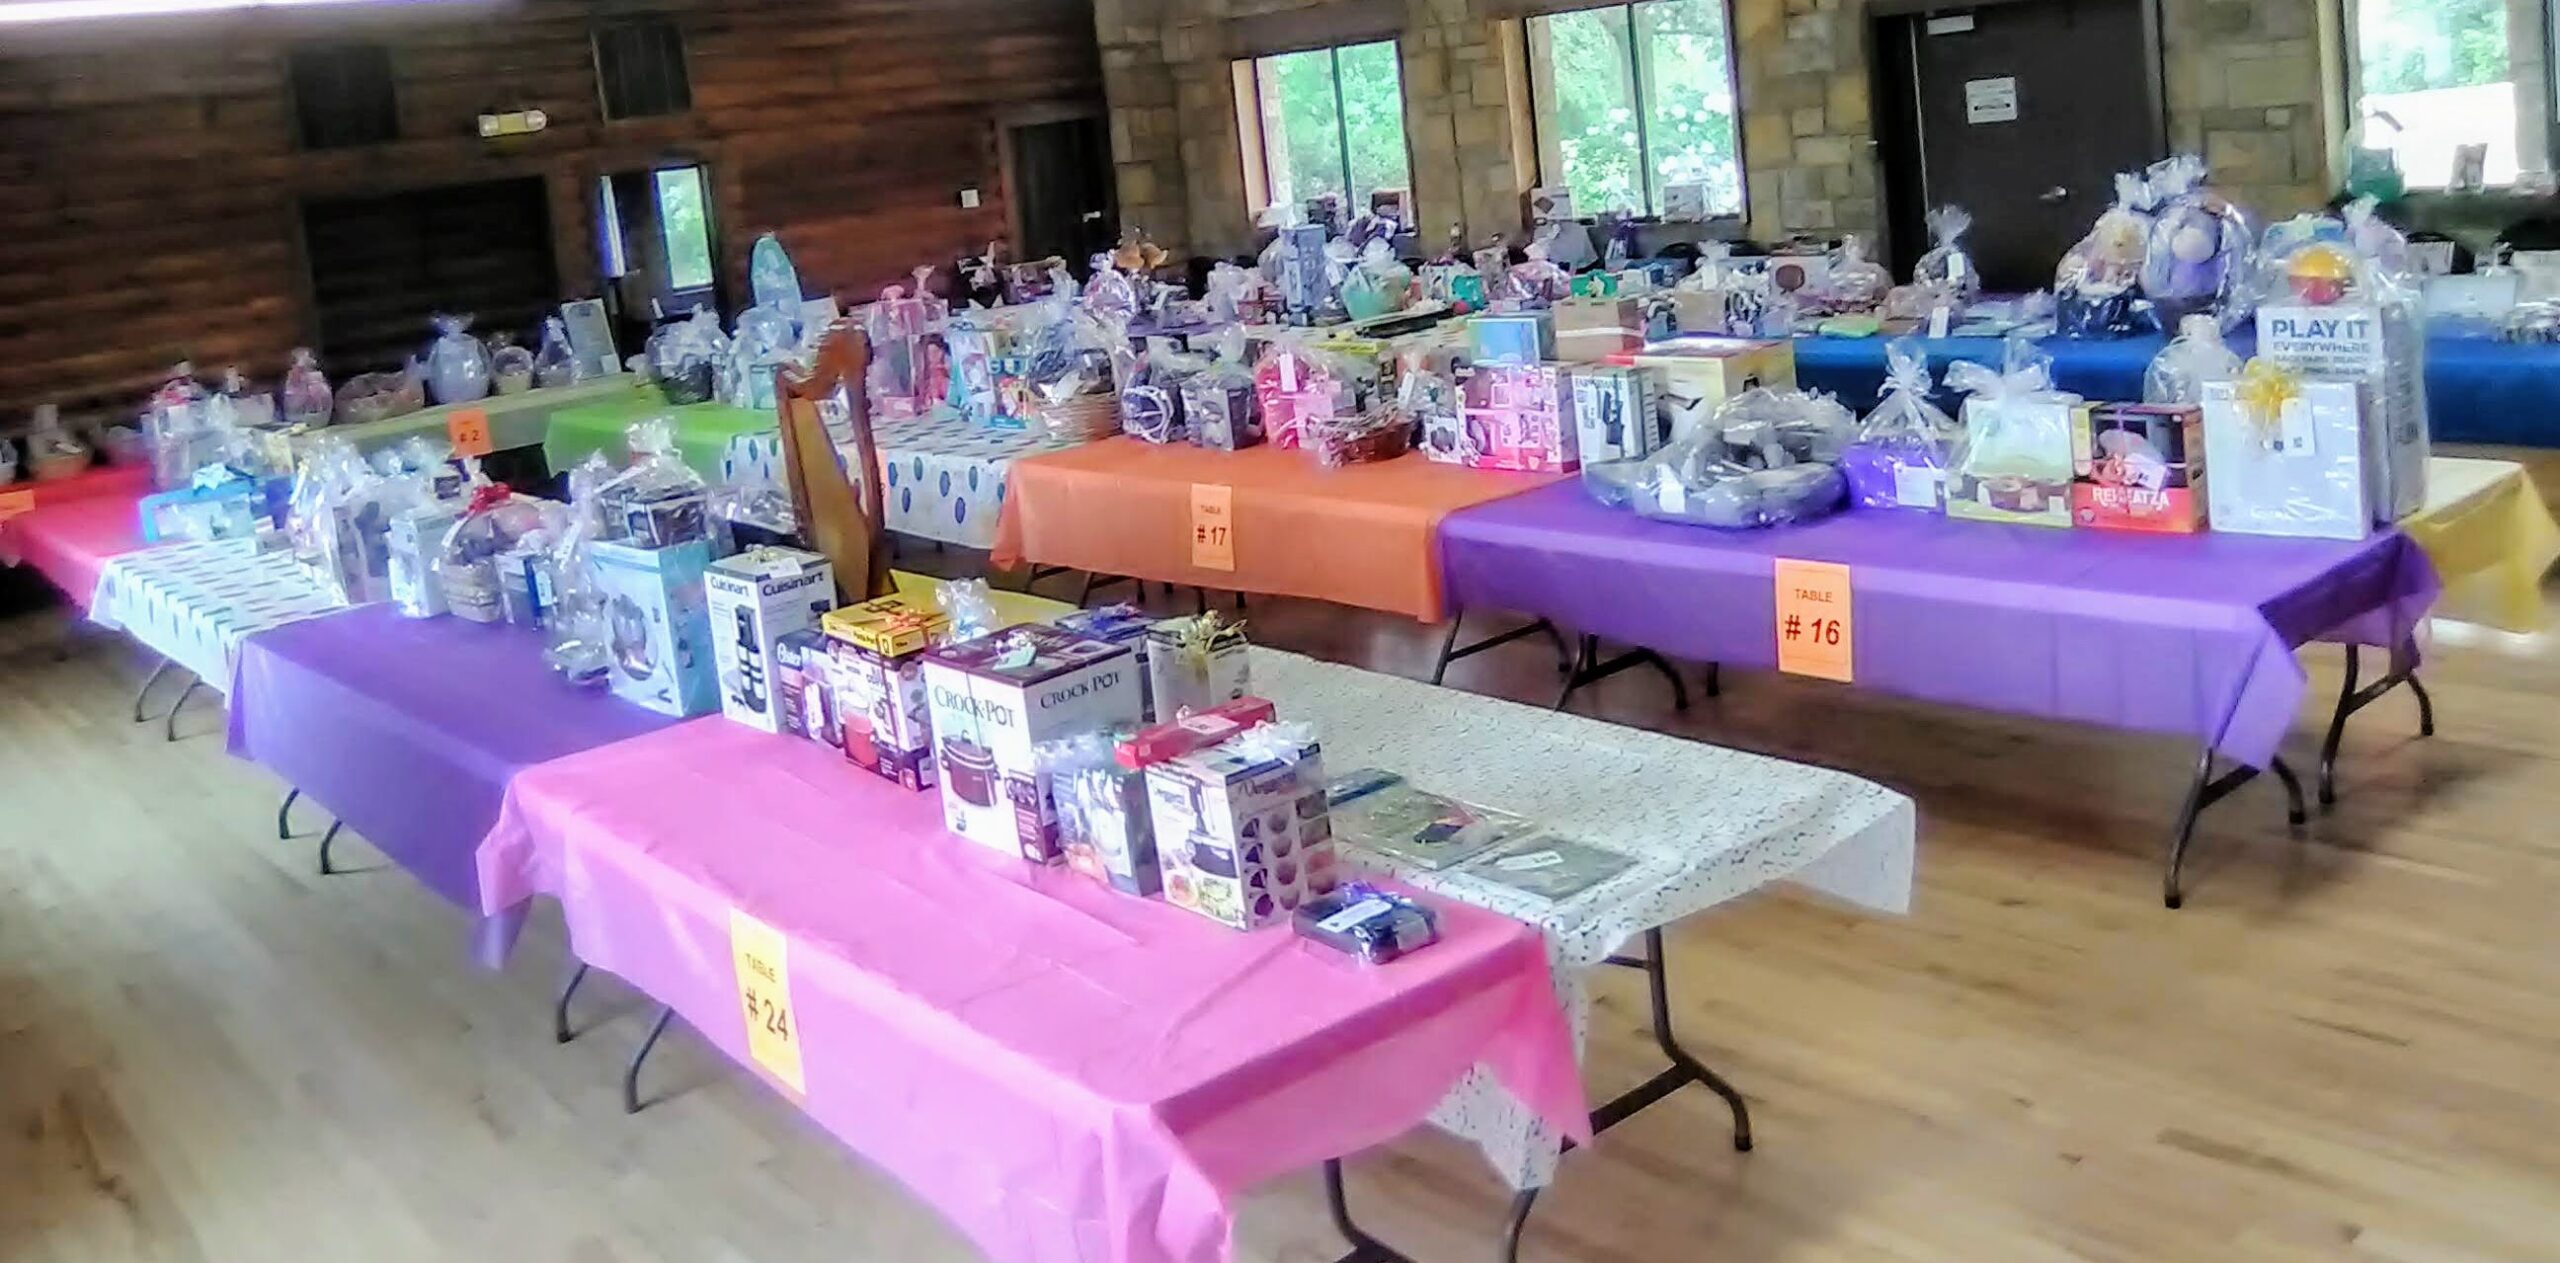 <h1 class="tribe-events-single-event-title">CrossRoads Silent Auction on Friday, September 16th at the CrossRoads Wesleyan Church</h1>